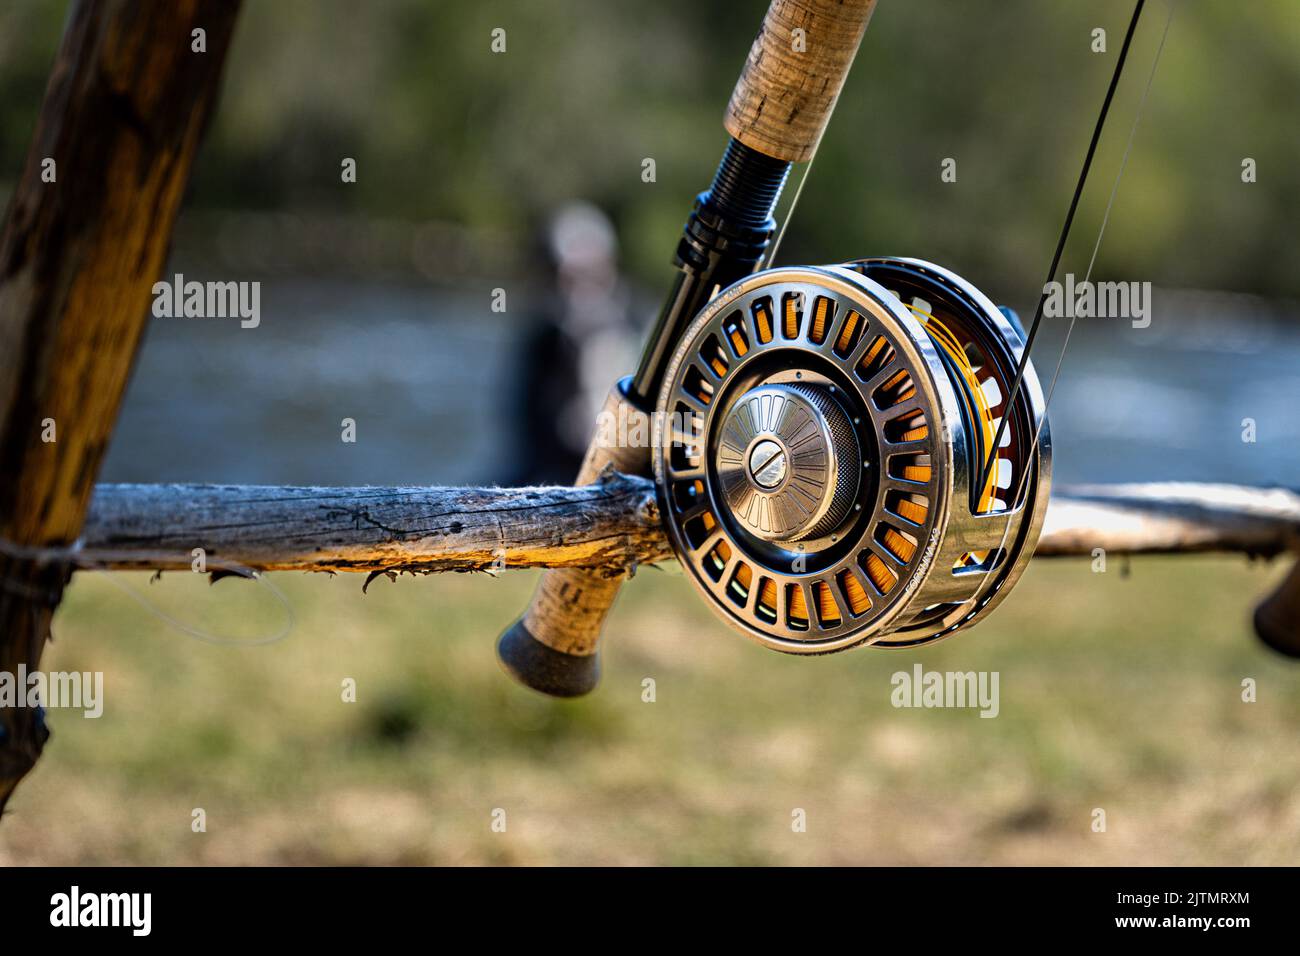 A closeup of a fishing rod on an old wooden stand in sunlight